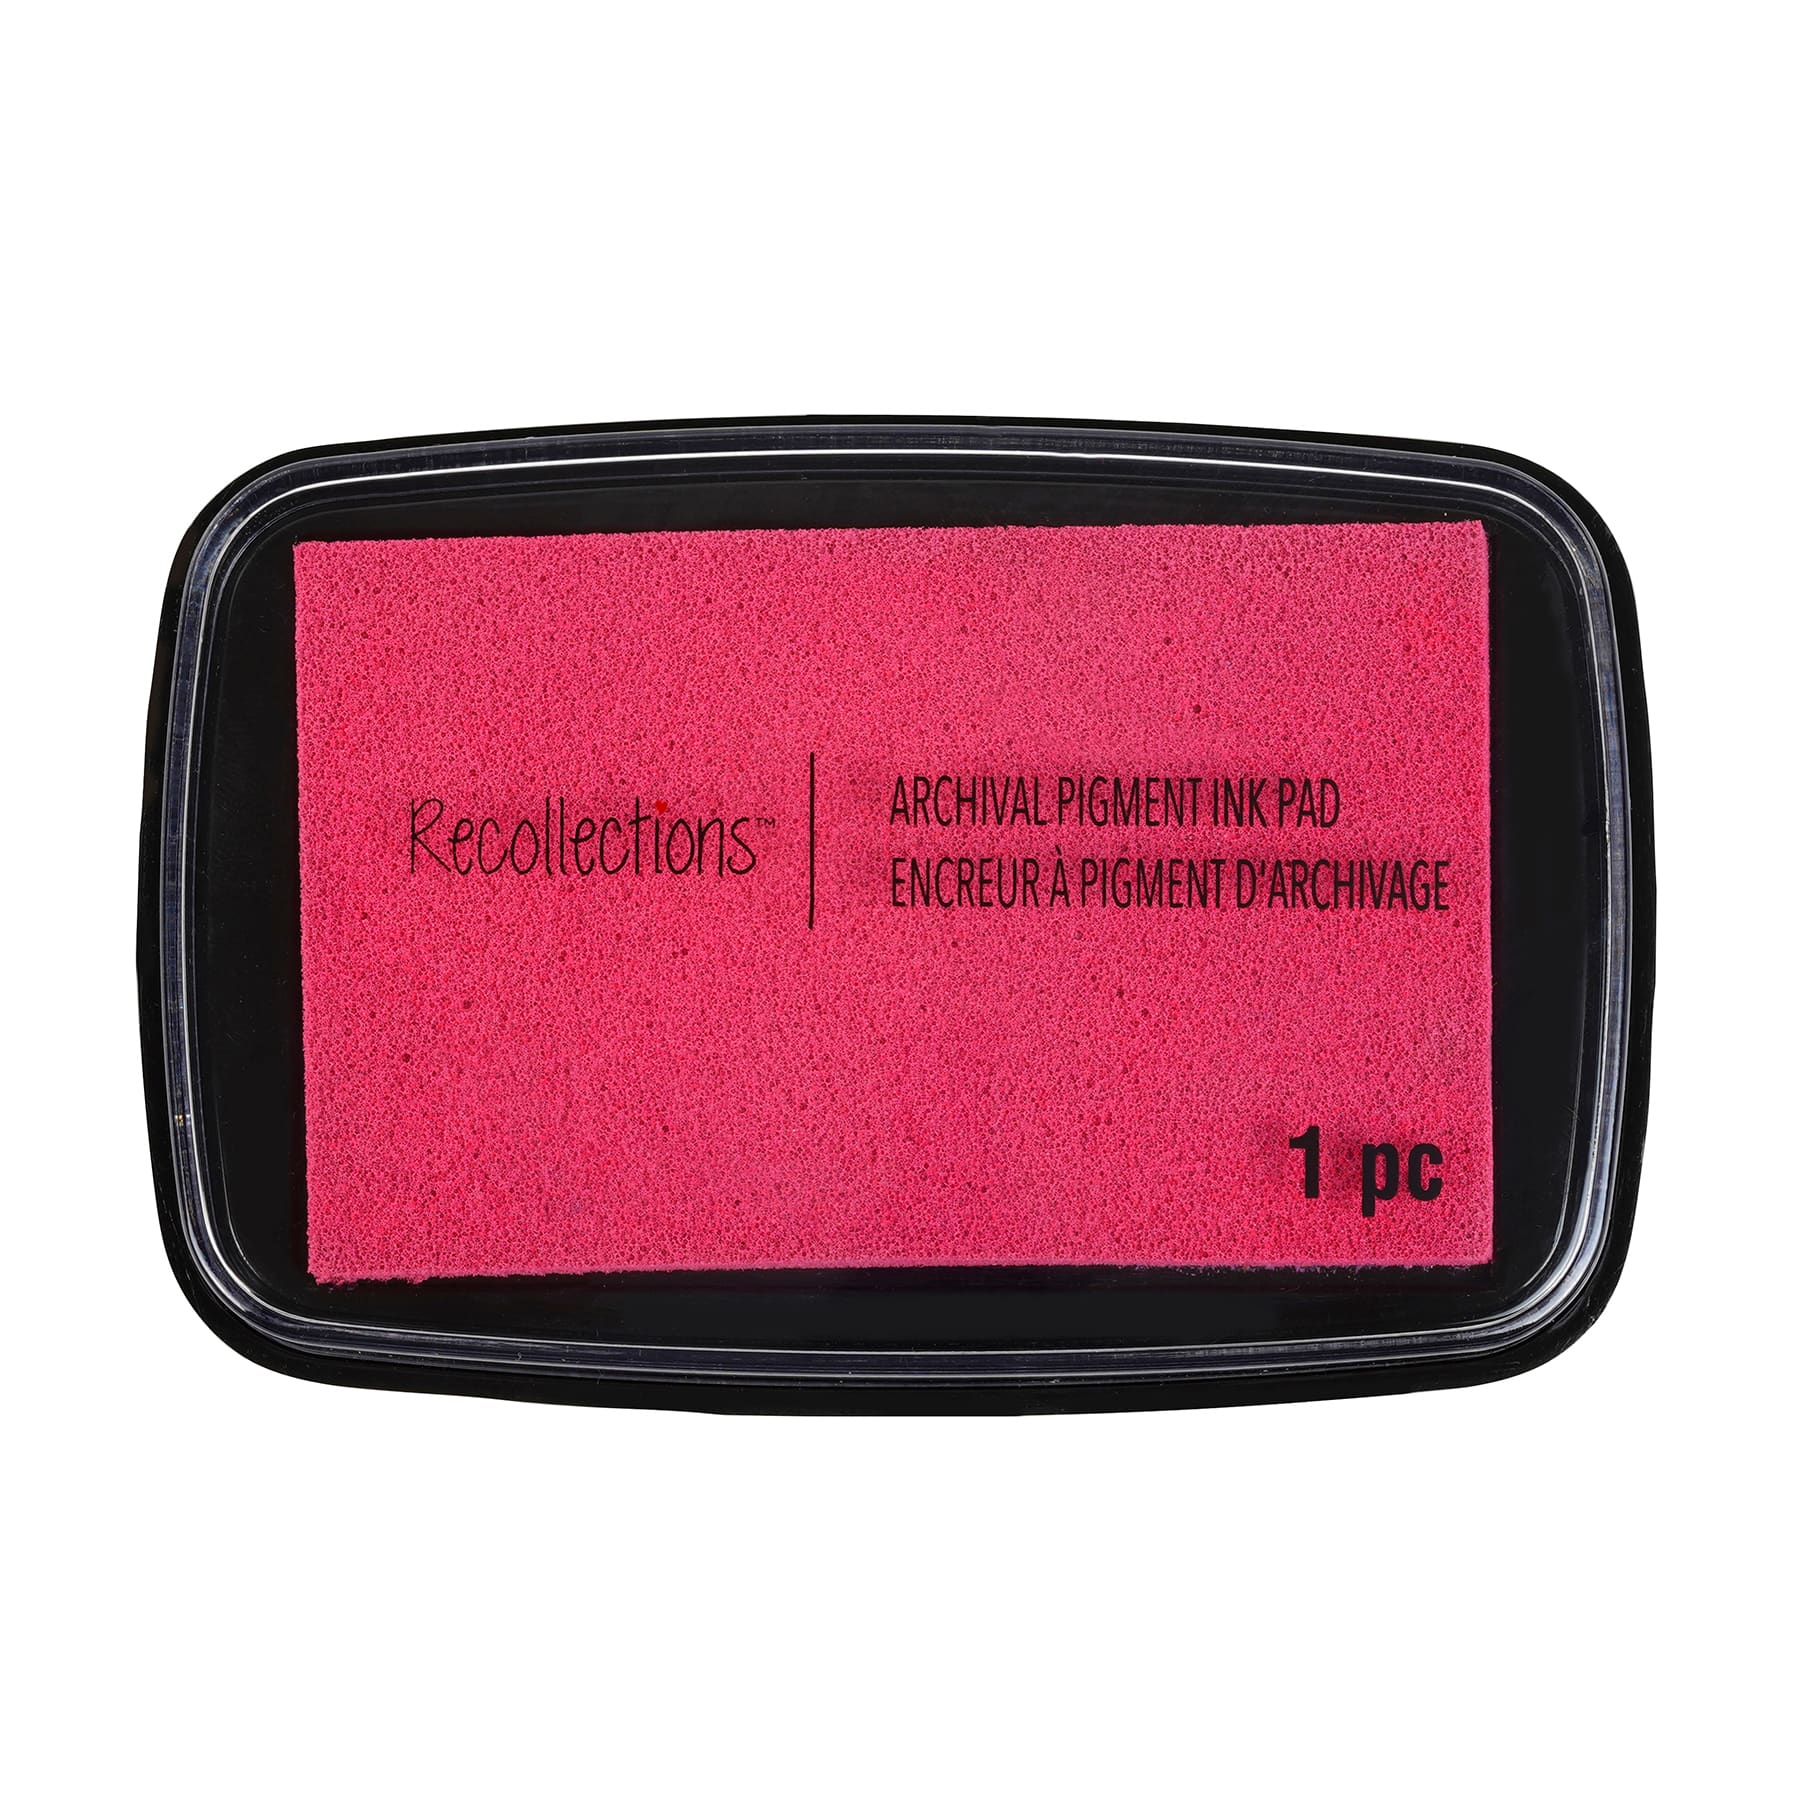 Archival Pigment Ink Pad by Recollections™ 